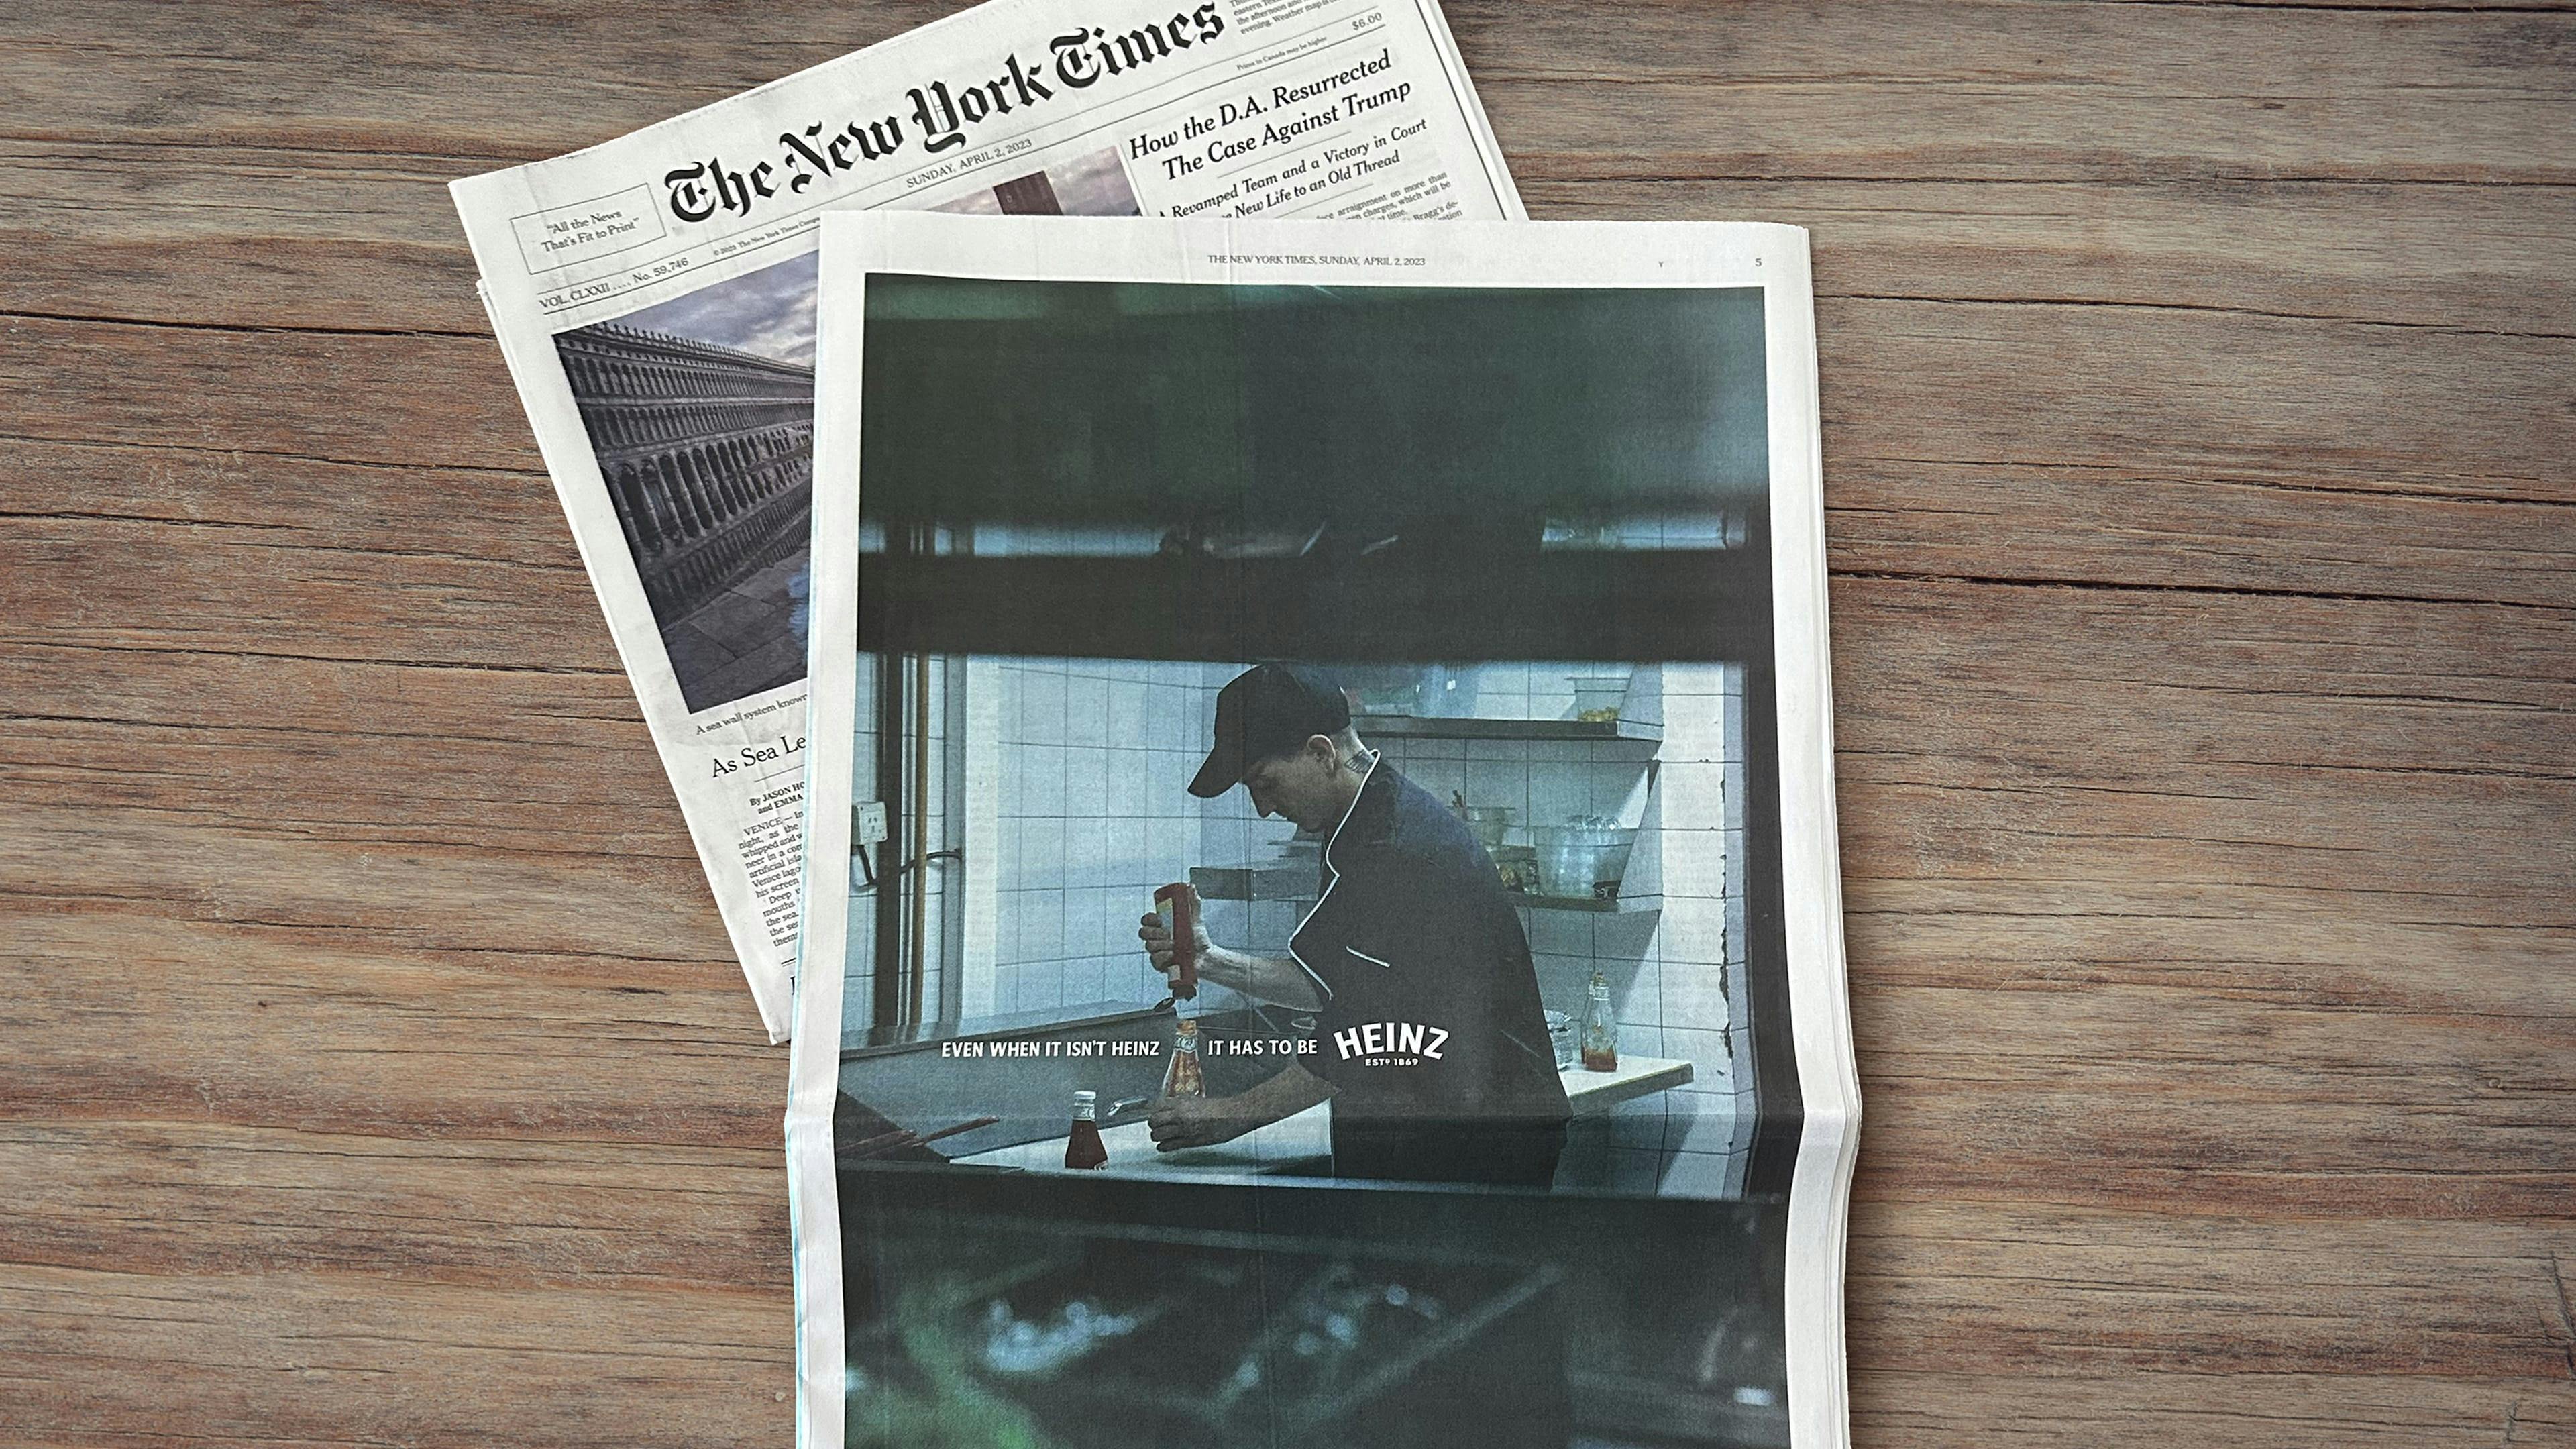 The New York Times newspaper lies on a wooden surface, featuring an advertisement with a chef squeezing non-Heinz ketchup into a Heinz ketchup bottle and the tagline “Even when it isn’t Heinz, it has to be Heinz.”